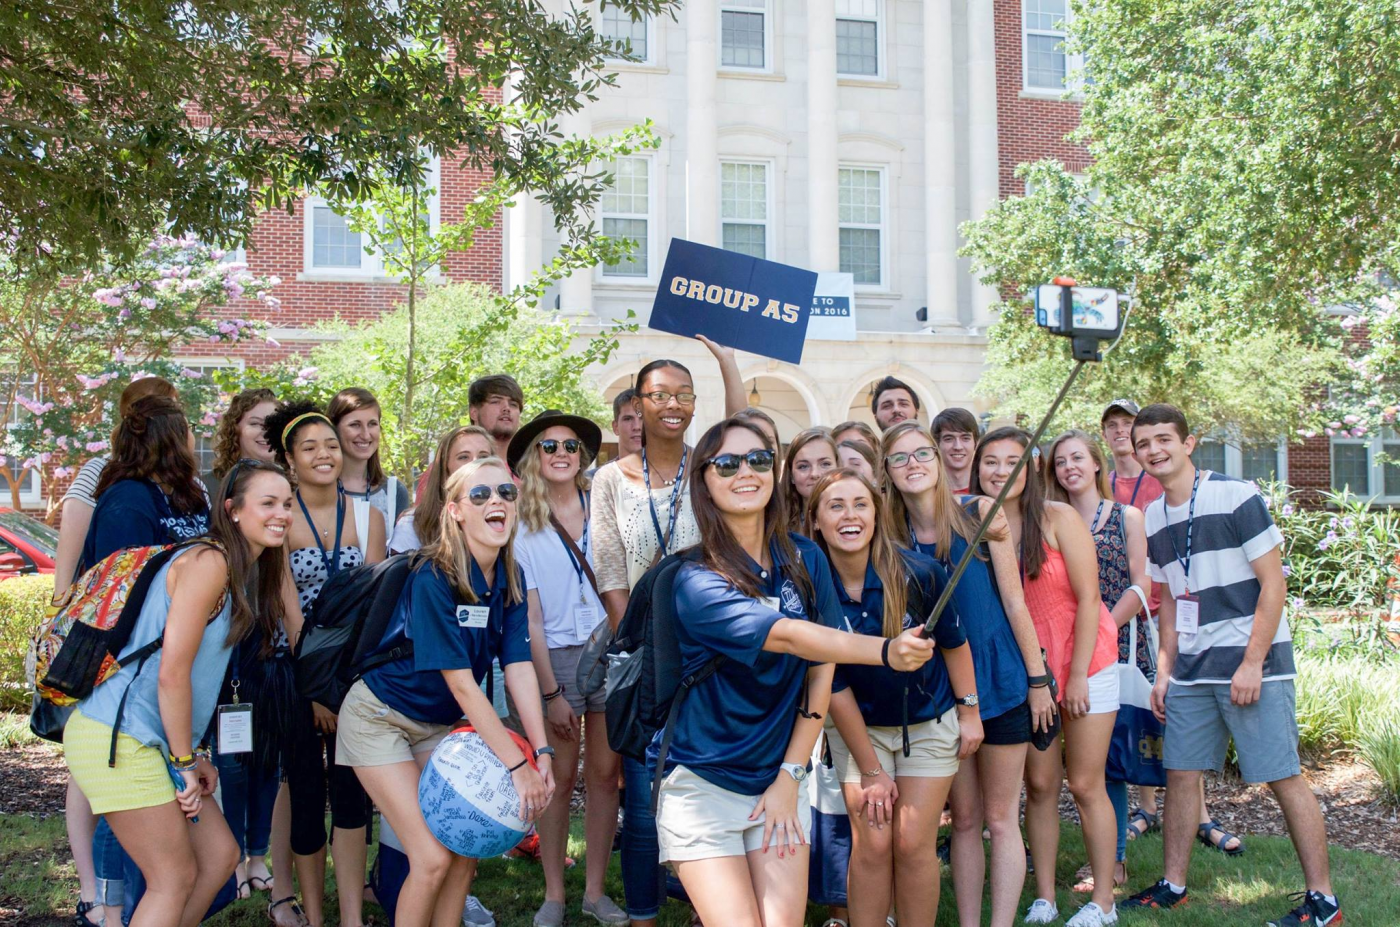 More brand-new Choctaws than ever will be welcomed to campus this summer for orientation sessions that will help them assimilate into MC’s unique campus culture.